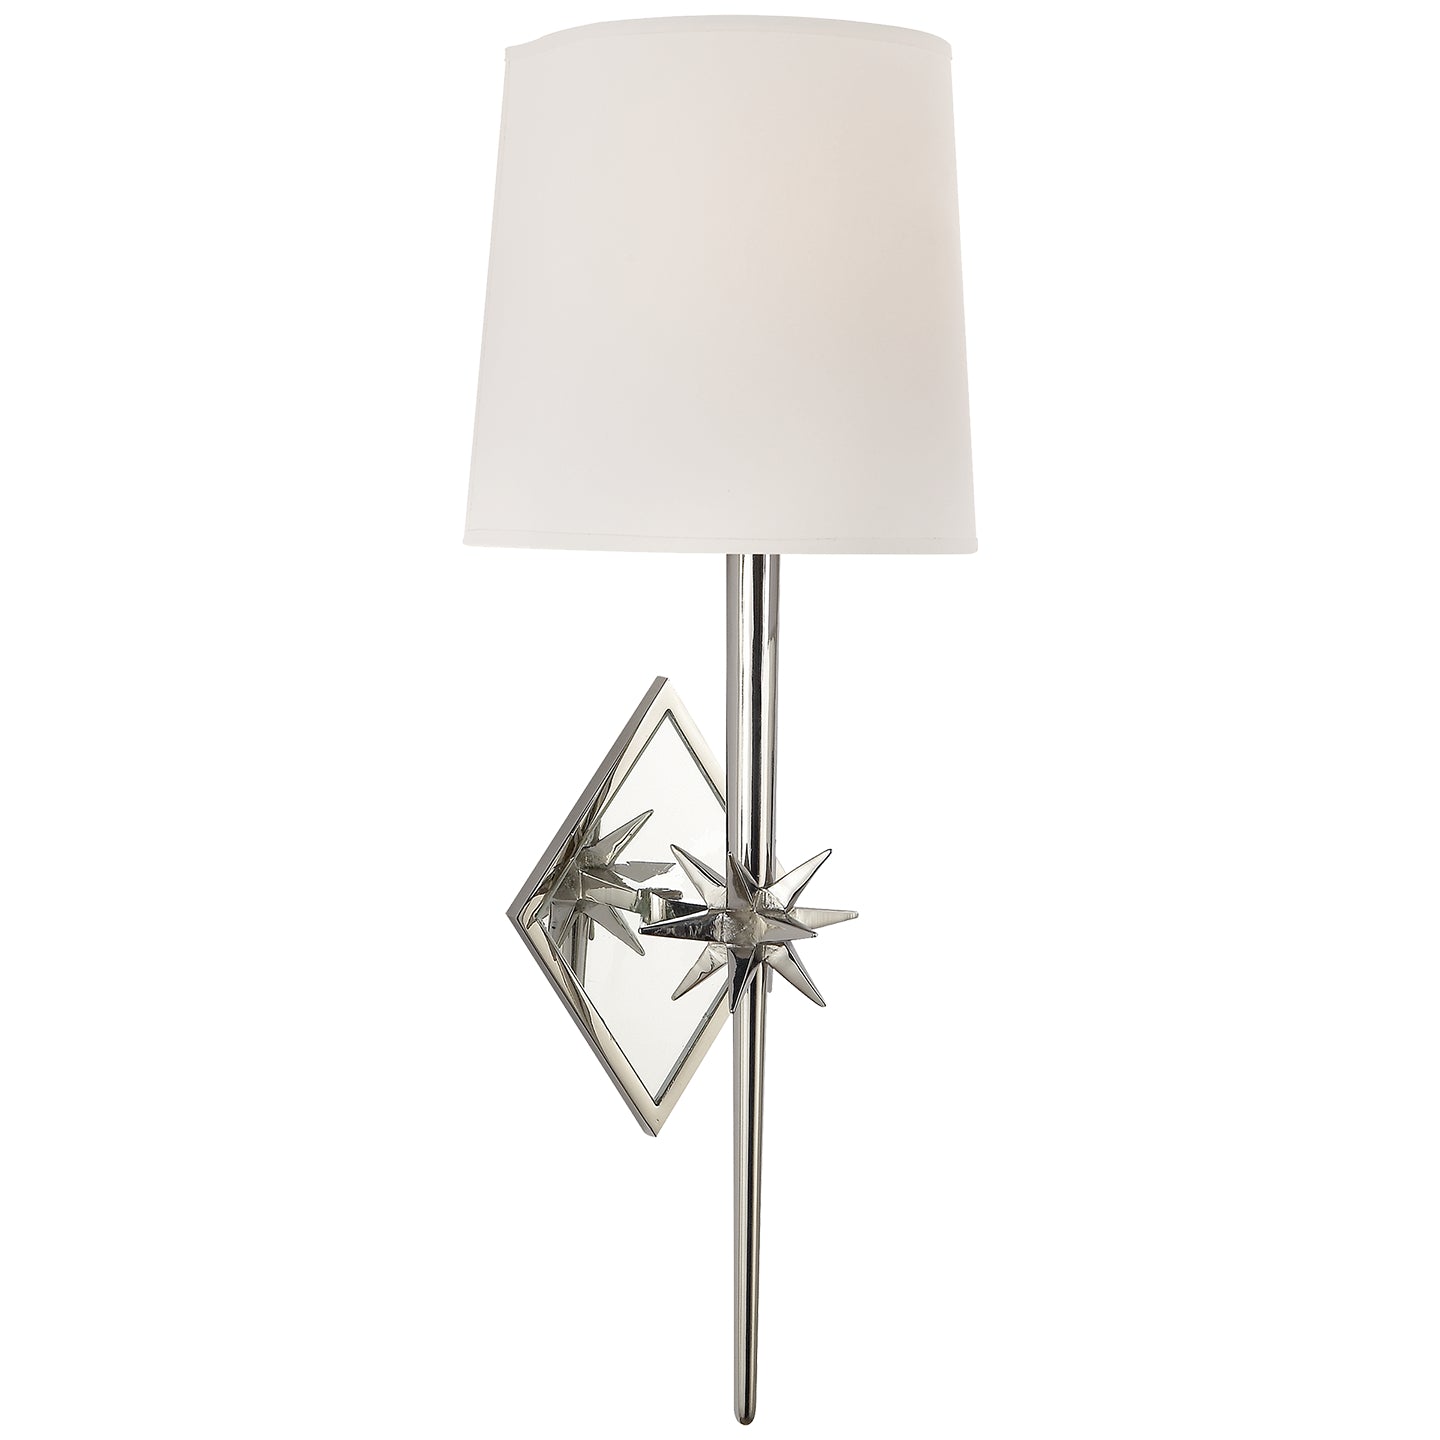 Load image into Gallery viewer, Visual Comfort Signature - S 2320PN-NP - One Light Wall Sconce - Etoile - Polished Nickel
